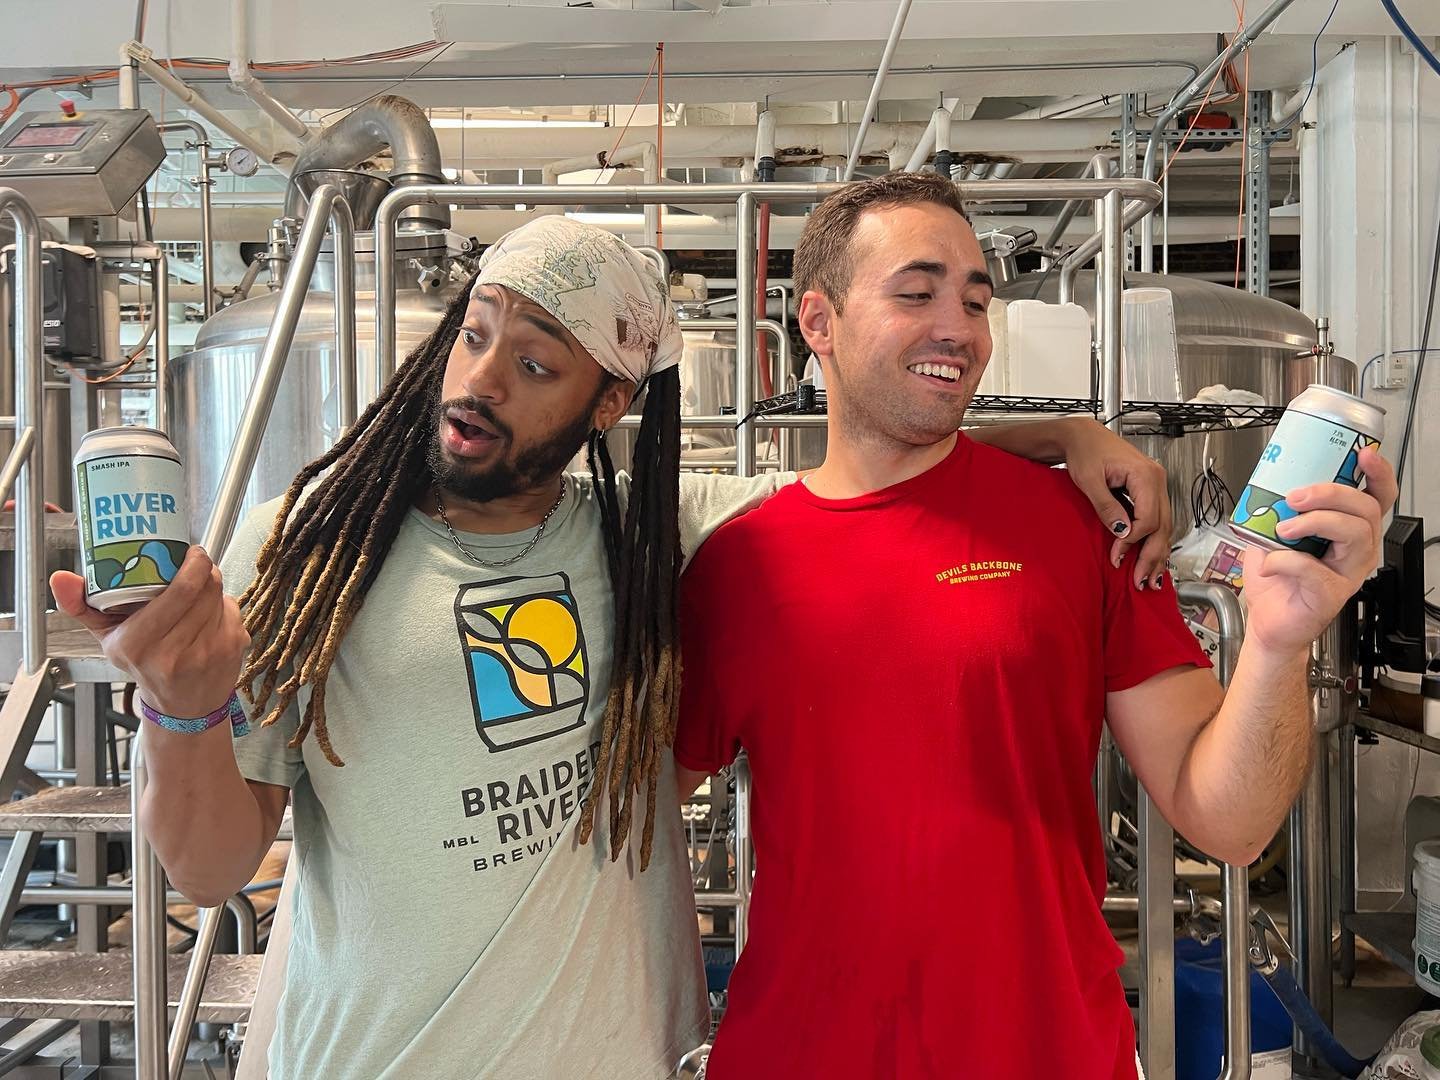 They can&rsquo;t believe it either but River Run SMASH IPA is out THIS FRIDAY! 

Our Single Malt And Single Hop IPA (SMASH) returns with Vienna malt and HBC 1019 hops. Notes of Valencia orange, peach, melon, and coconut from the hops pair with the fu